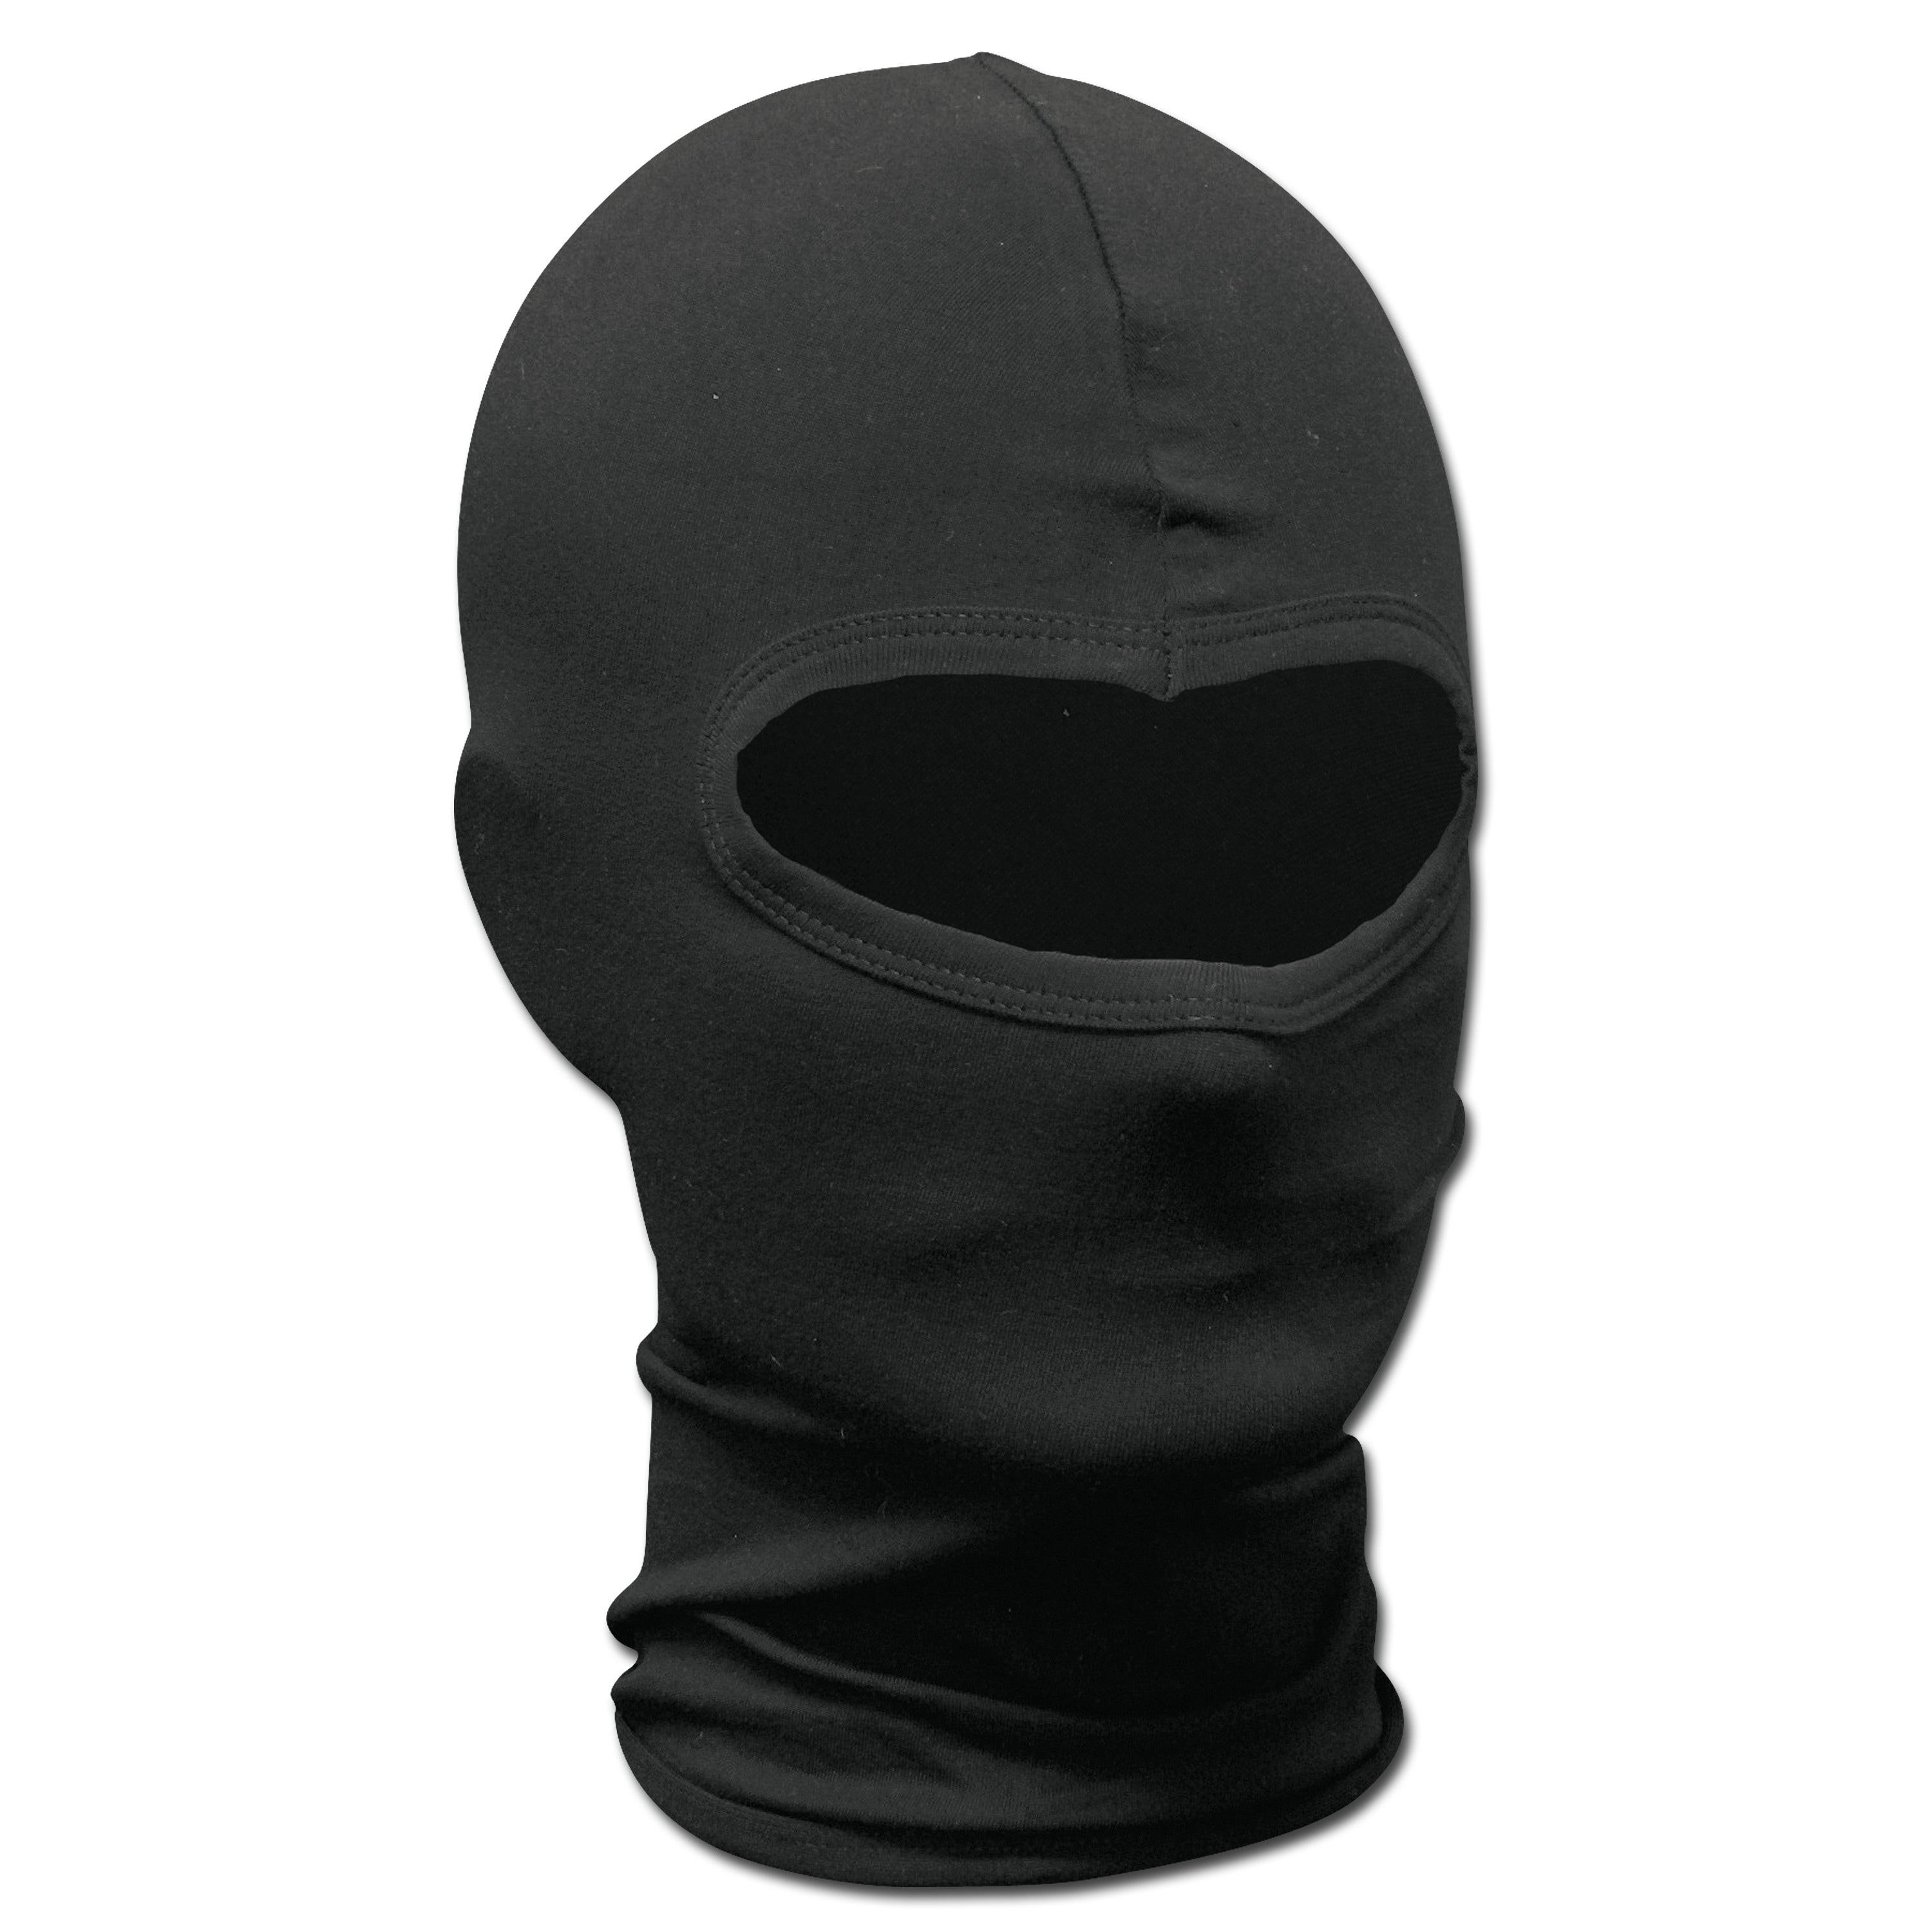 Purchase the Face Mask 1-Hole Elasthan black by ASMC